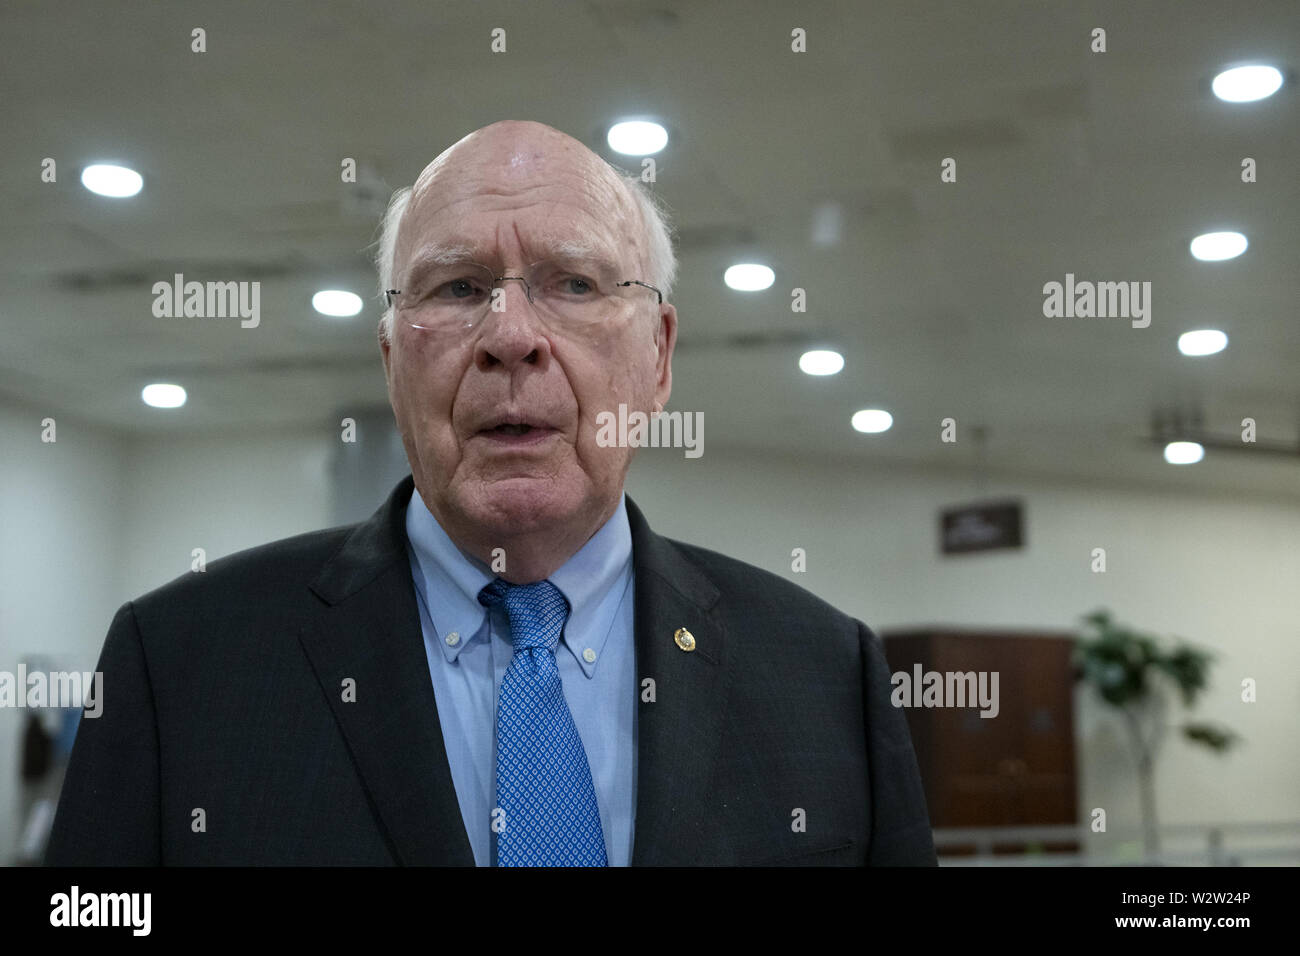 Washington, District of Columbia, USA. 10th July, 2019. United States Senator Patrick Leahy (Democrat of Vermont) arrives to a closed door briefing on American election security on Capitol Hill in Washington, DC, U.S. on July 10, 2019. Credit: Stefani Reynolds/CNP/ZUMA Wire/Alamy Live News Stock Photo